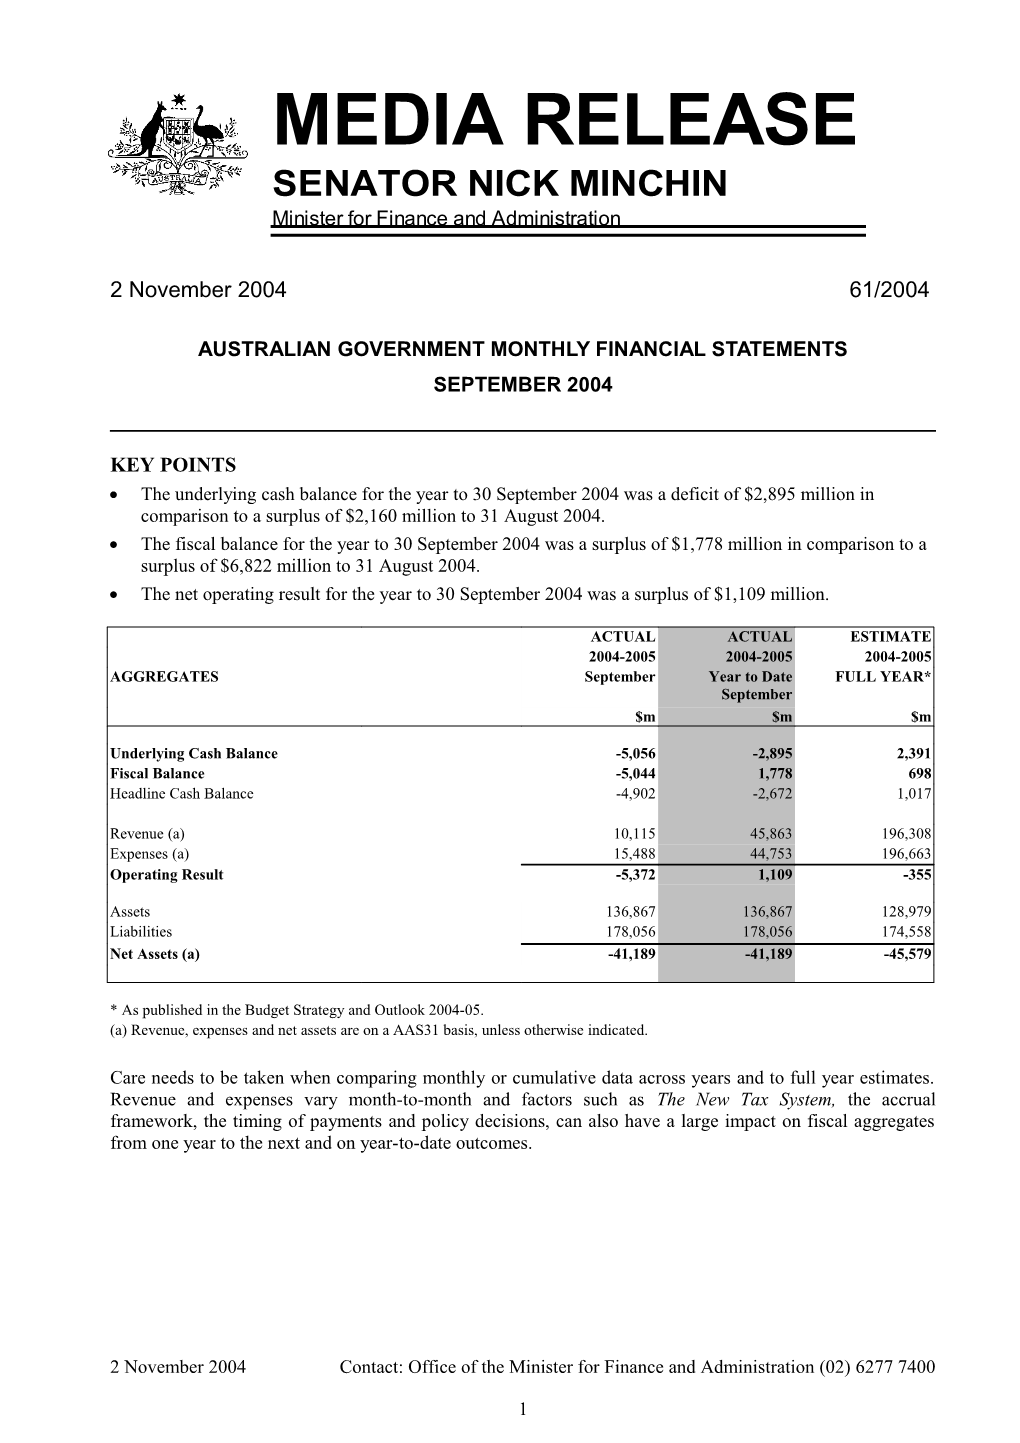 Australian Government Monthly Financial Statements